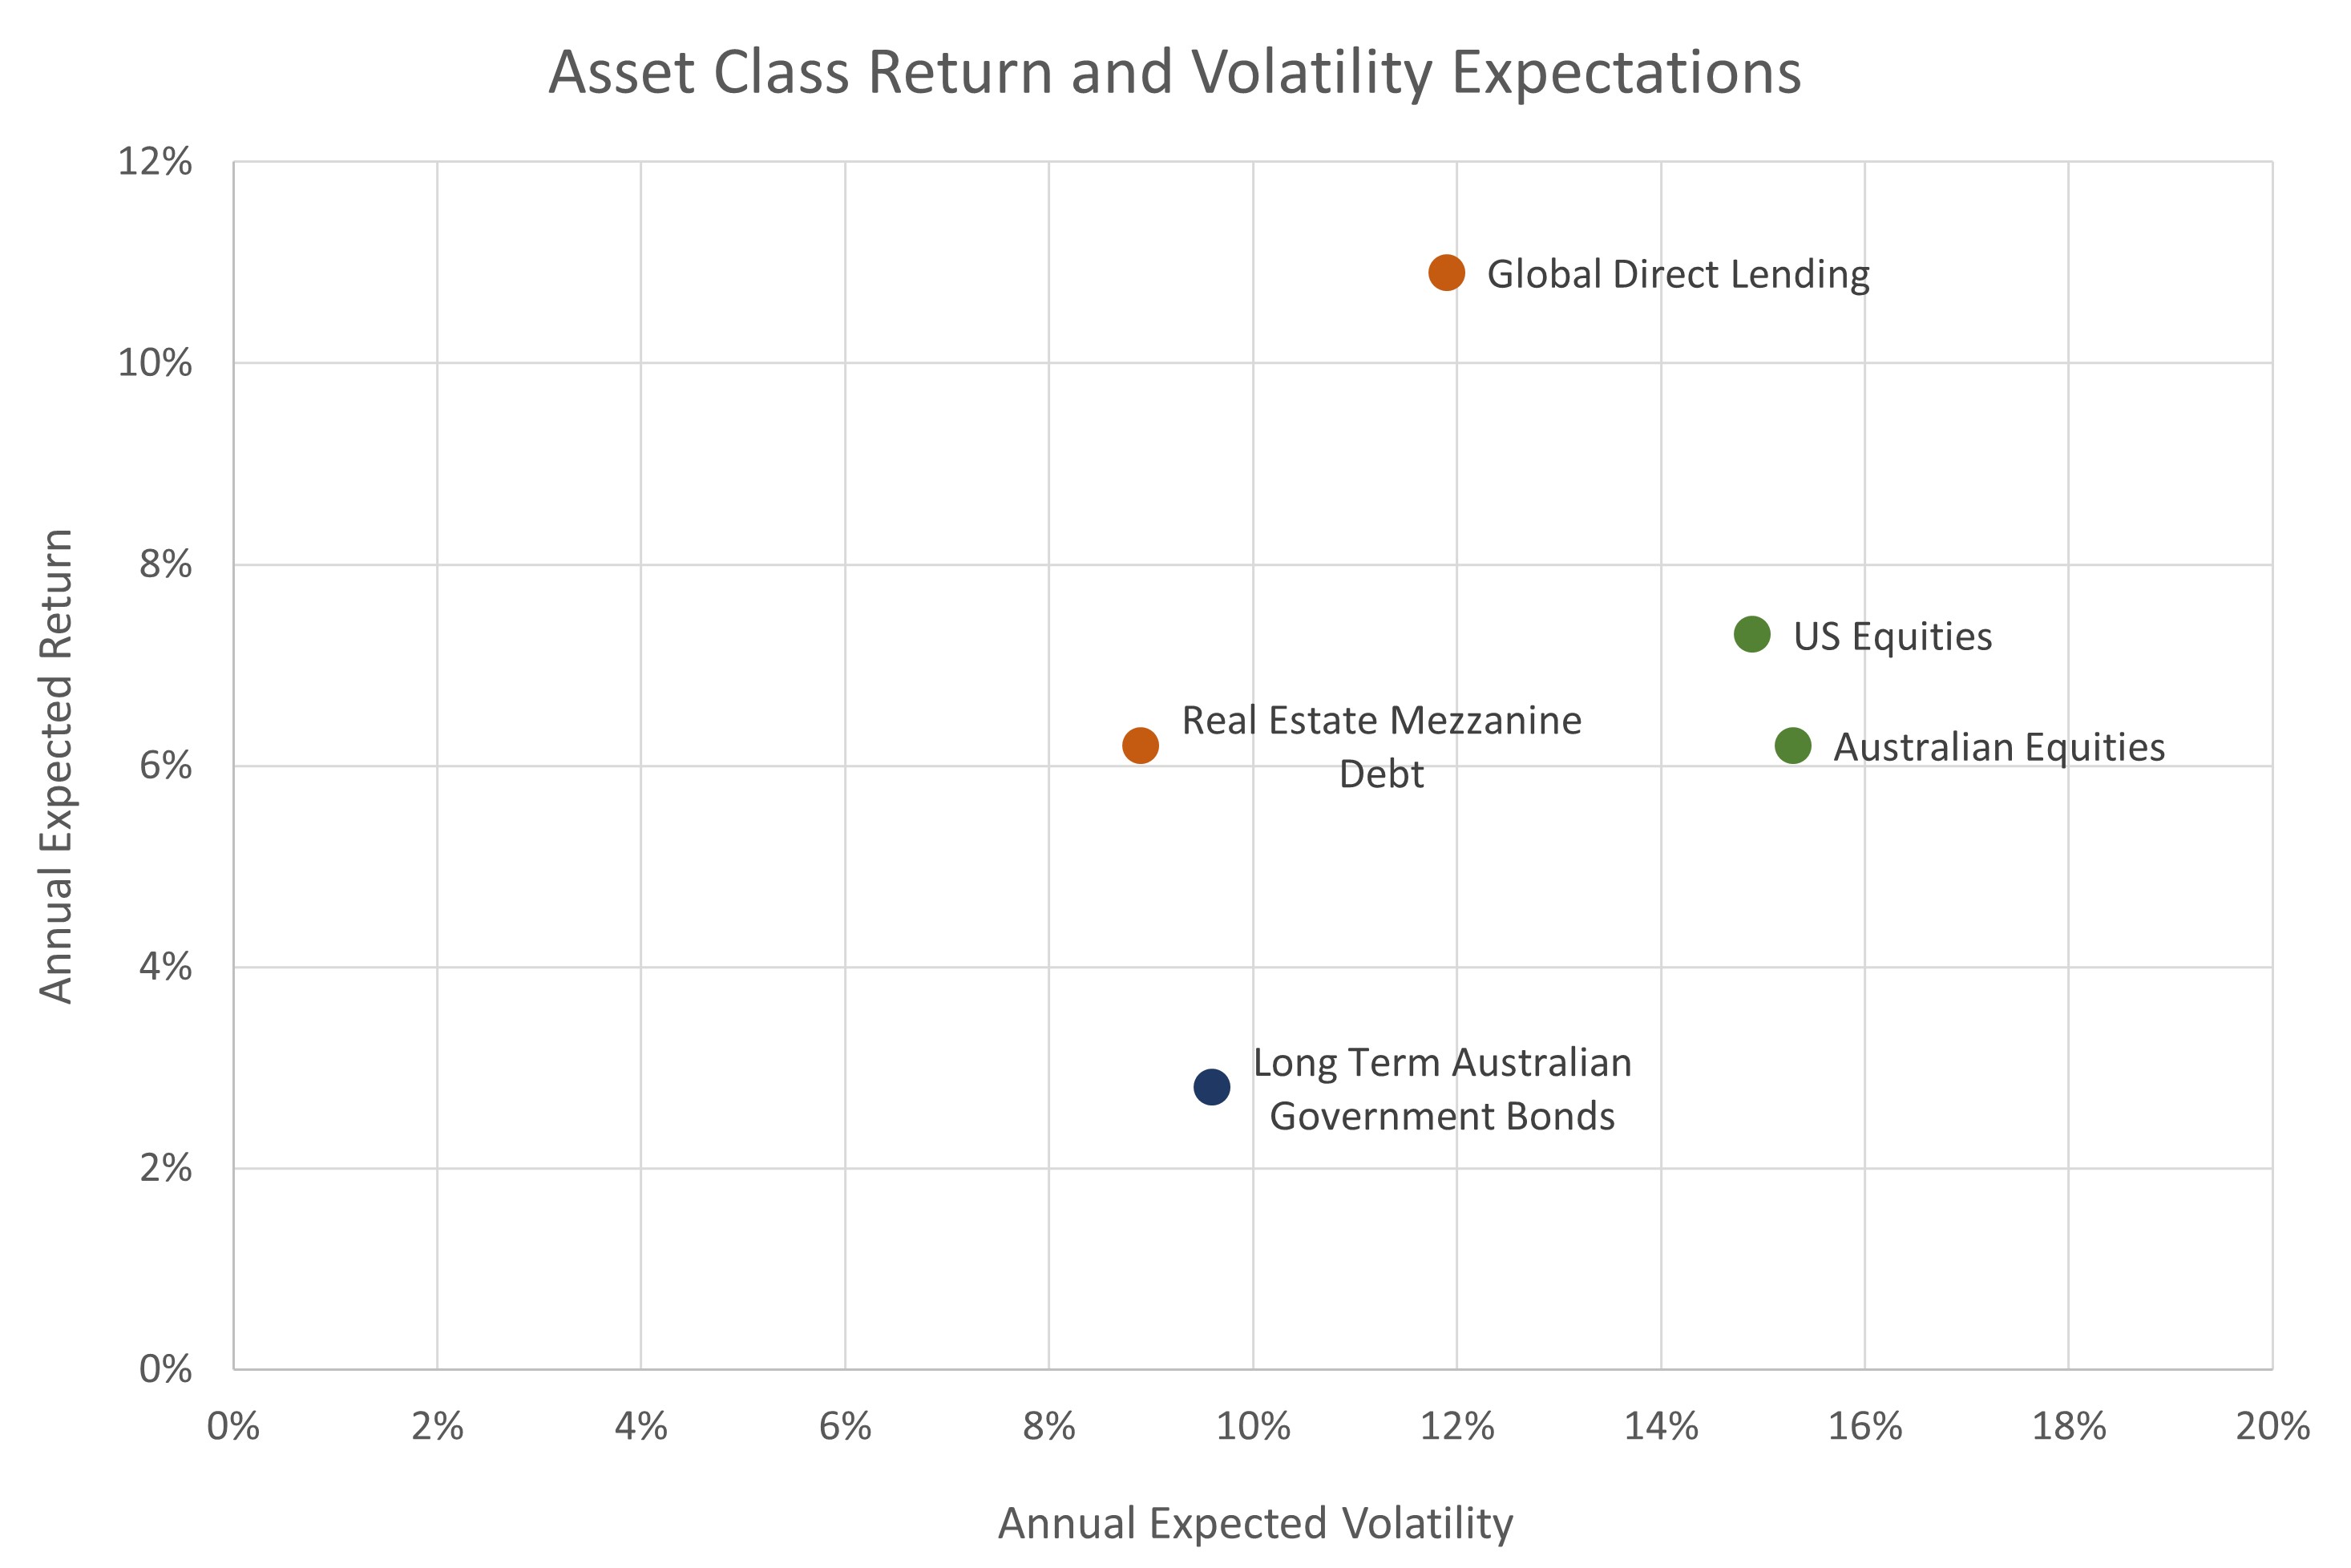 Source: BlackRock
Investment Institute, May 2023. Data as of 31 March 2023. Returns are expected
annual nominal returns in Australian Dollars over the next 5 years. Volatility
is the long-term volatility expectation.